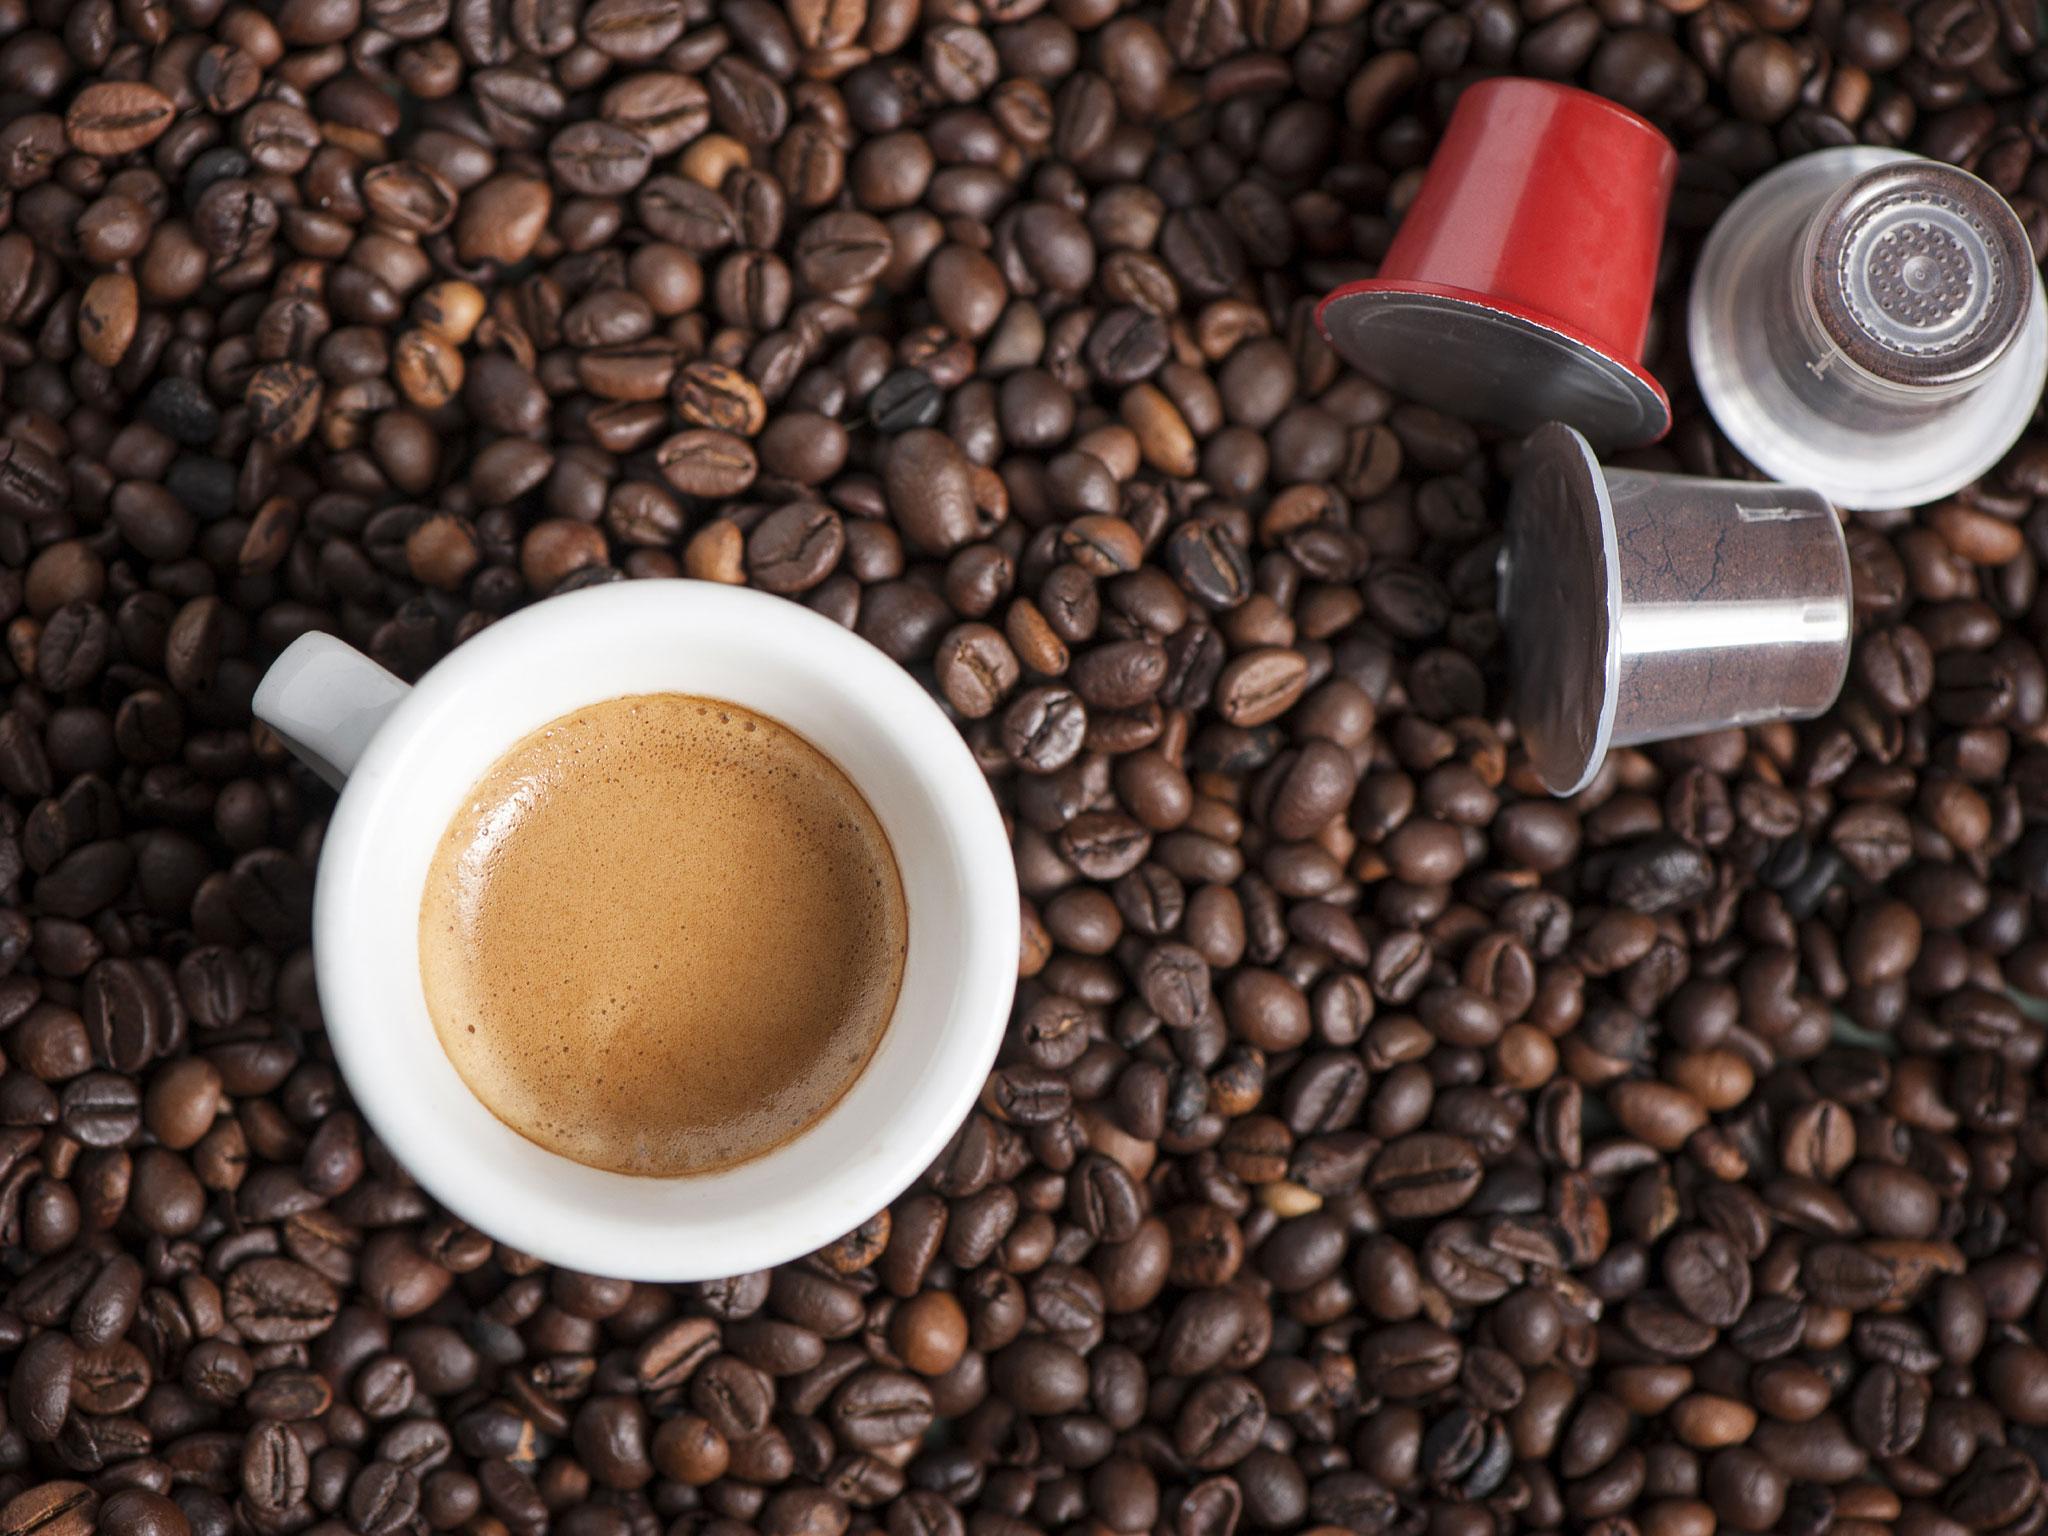 People who drink one cup of coffee each day are 12 per cent less likely to die